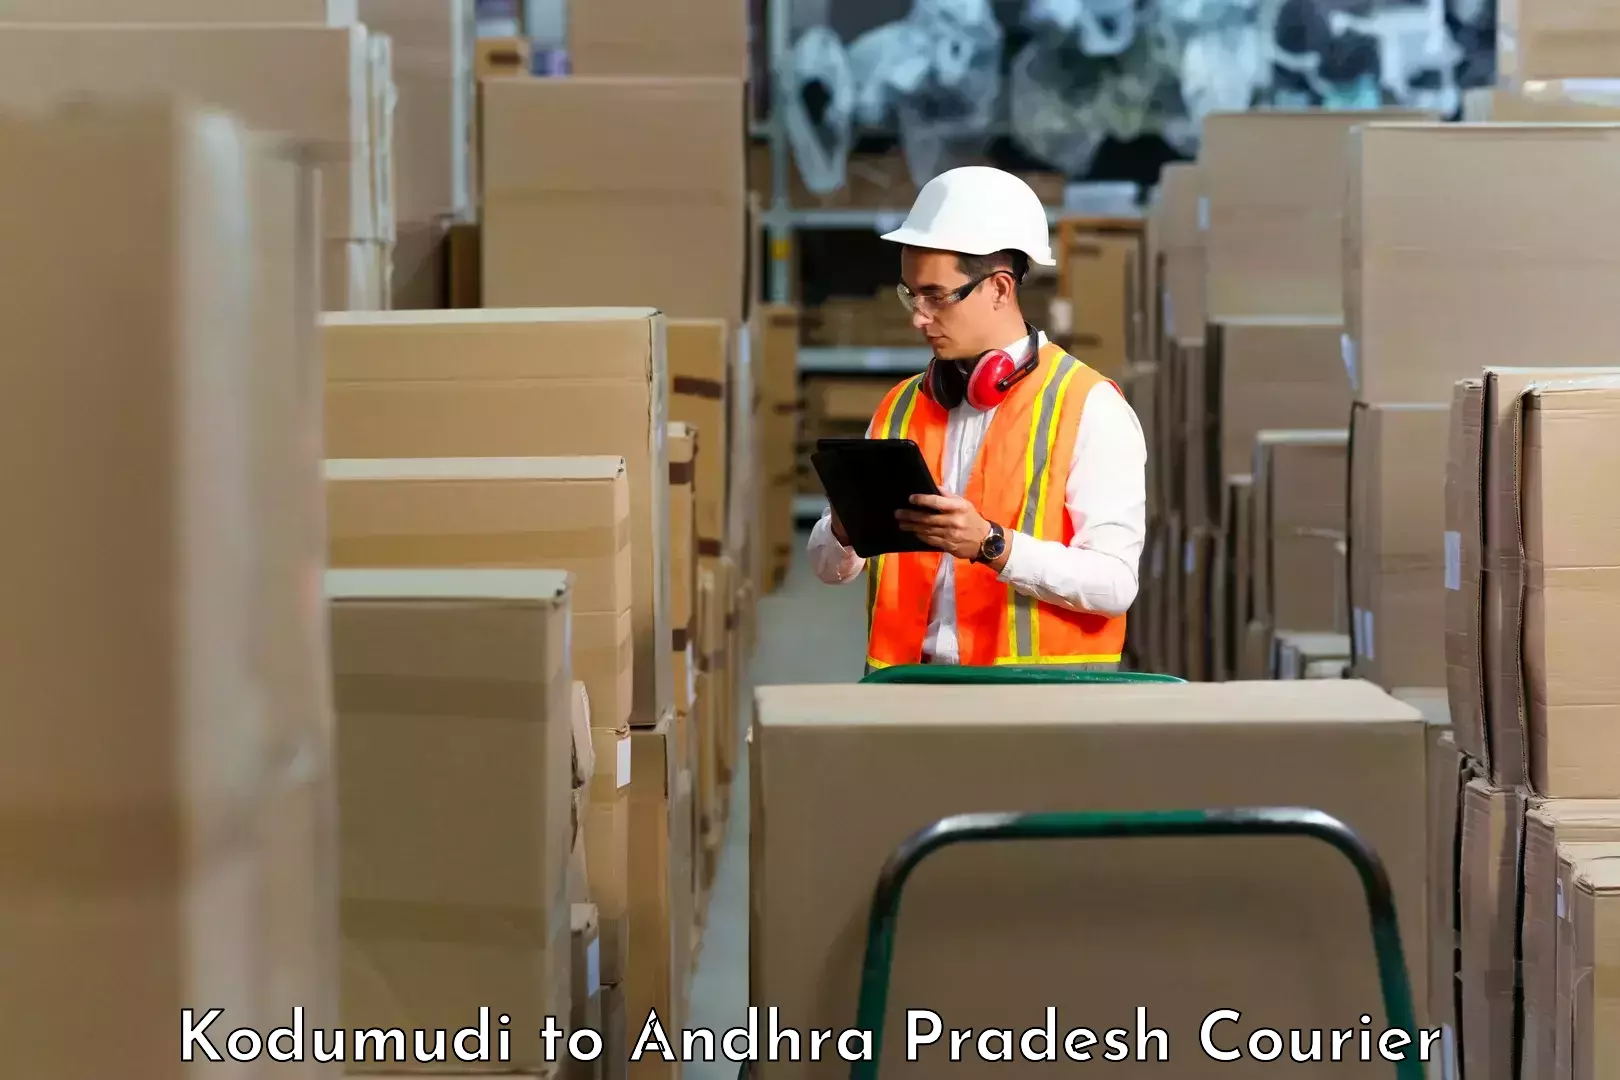 Personal parcel delivery in Kodumudi to Gopalapatnam